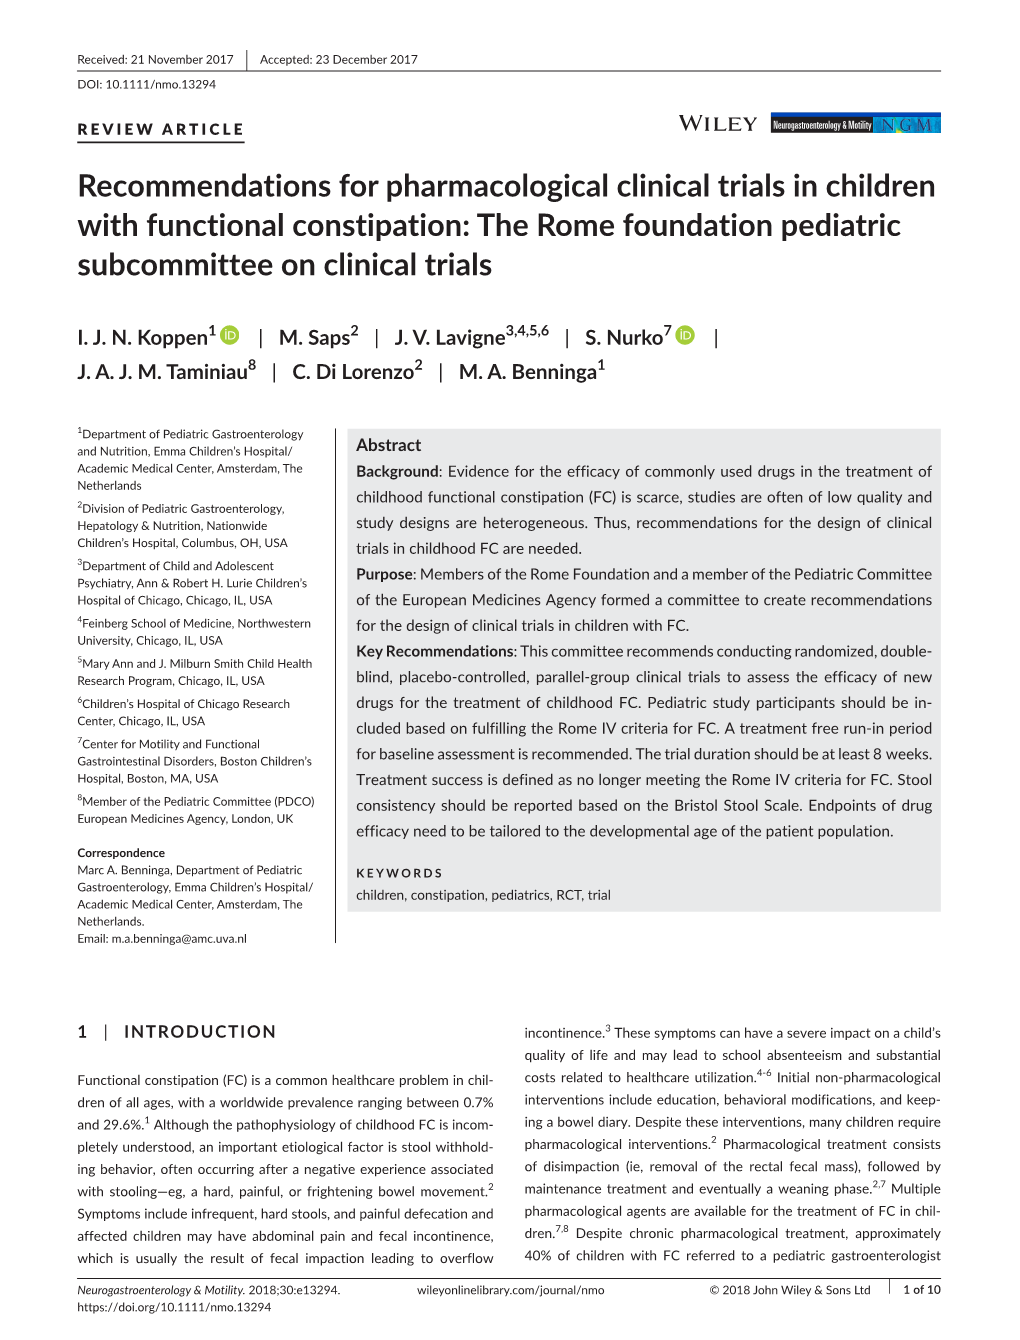 Recommendations for Pharmacological Clinical Trials in Children with Functional Constipation: the Rome Foundation Pediatric Subcommittee on Clinical Trials